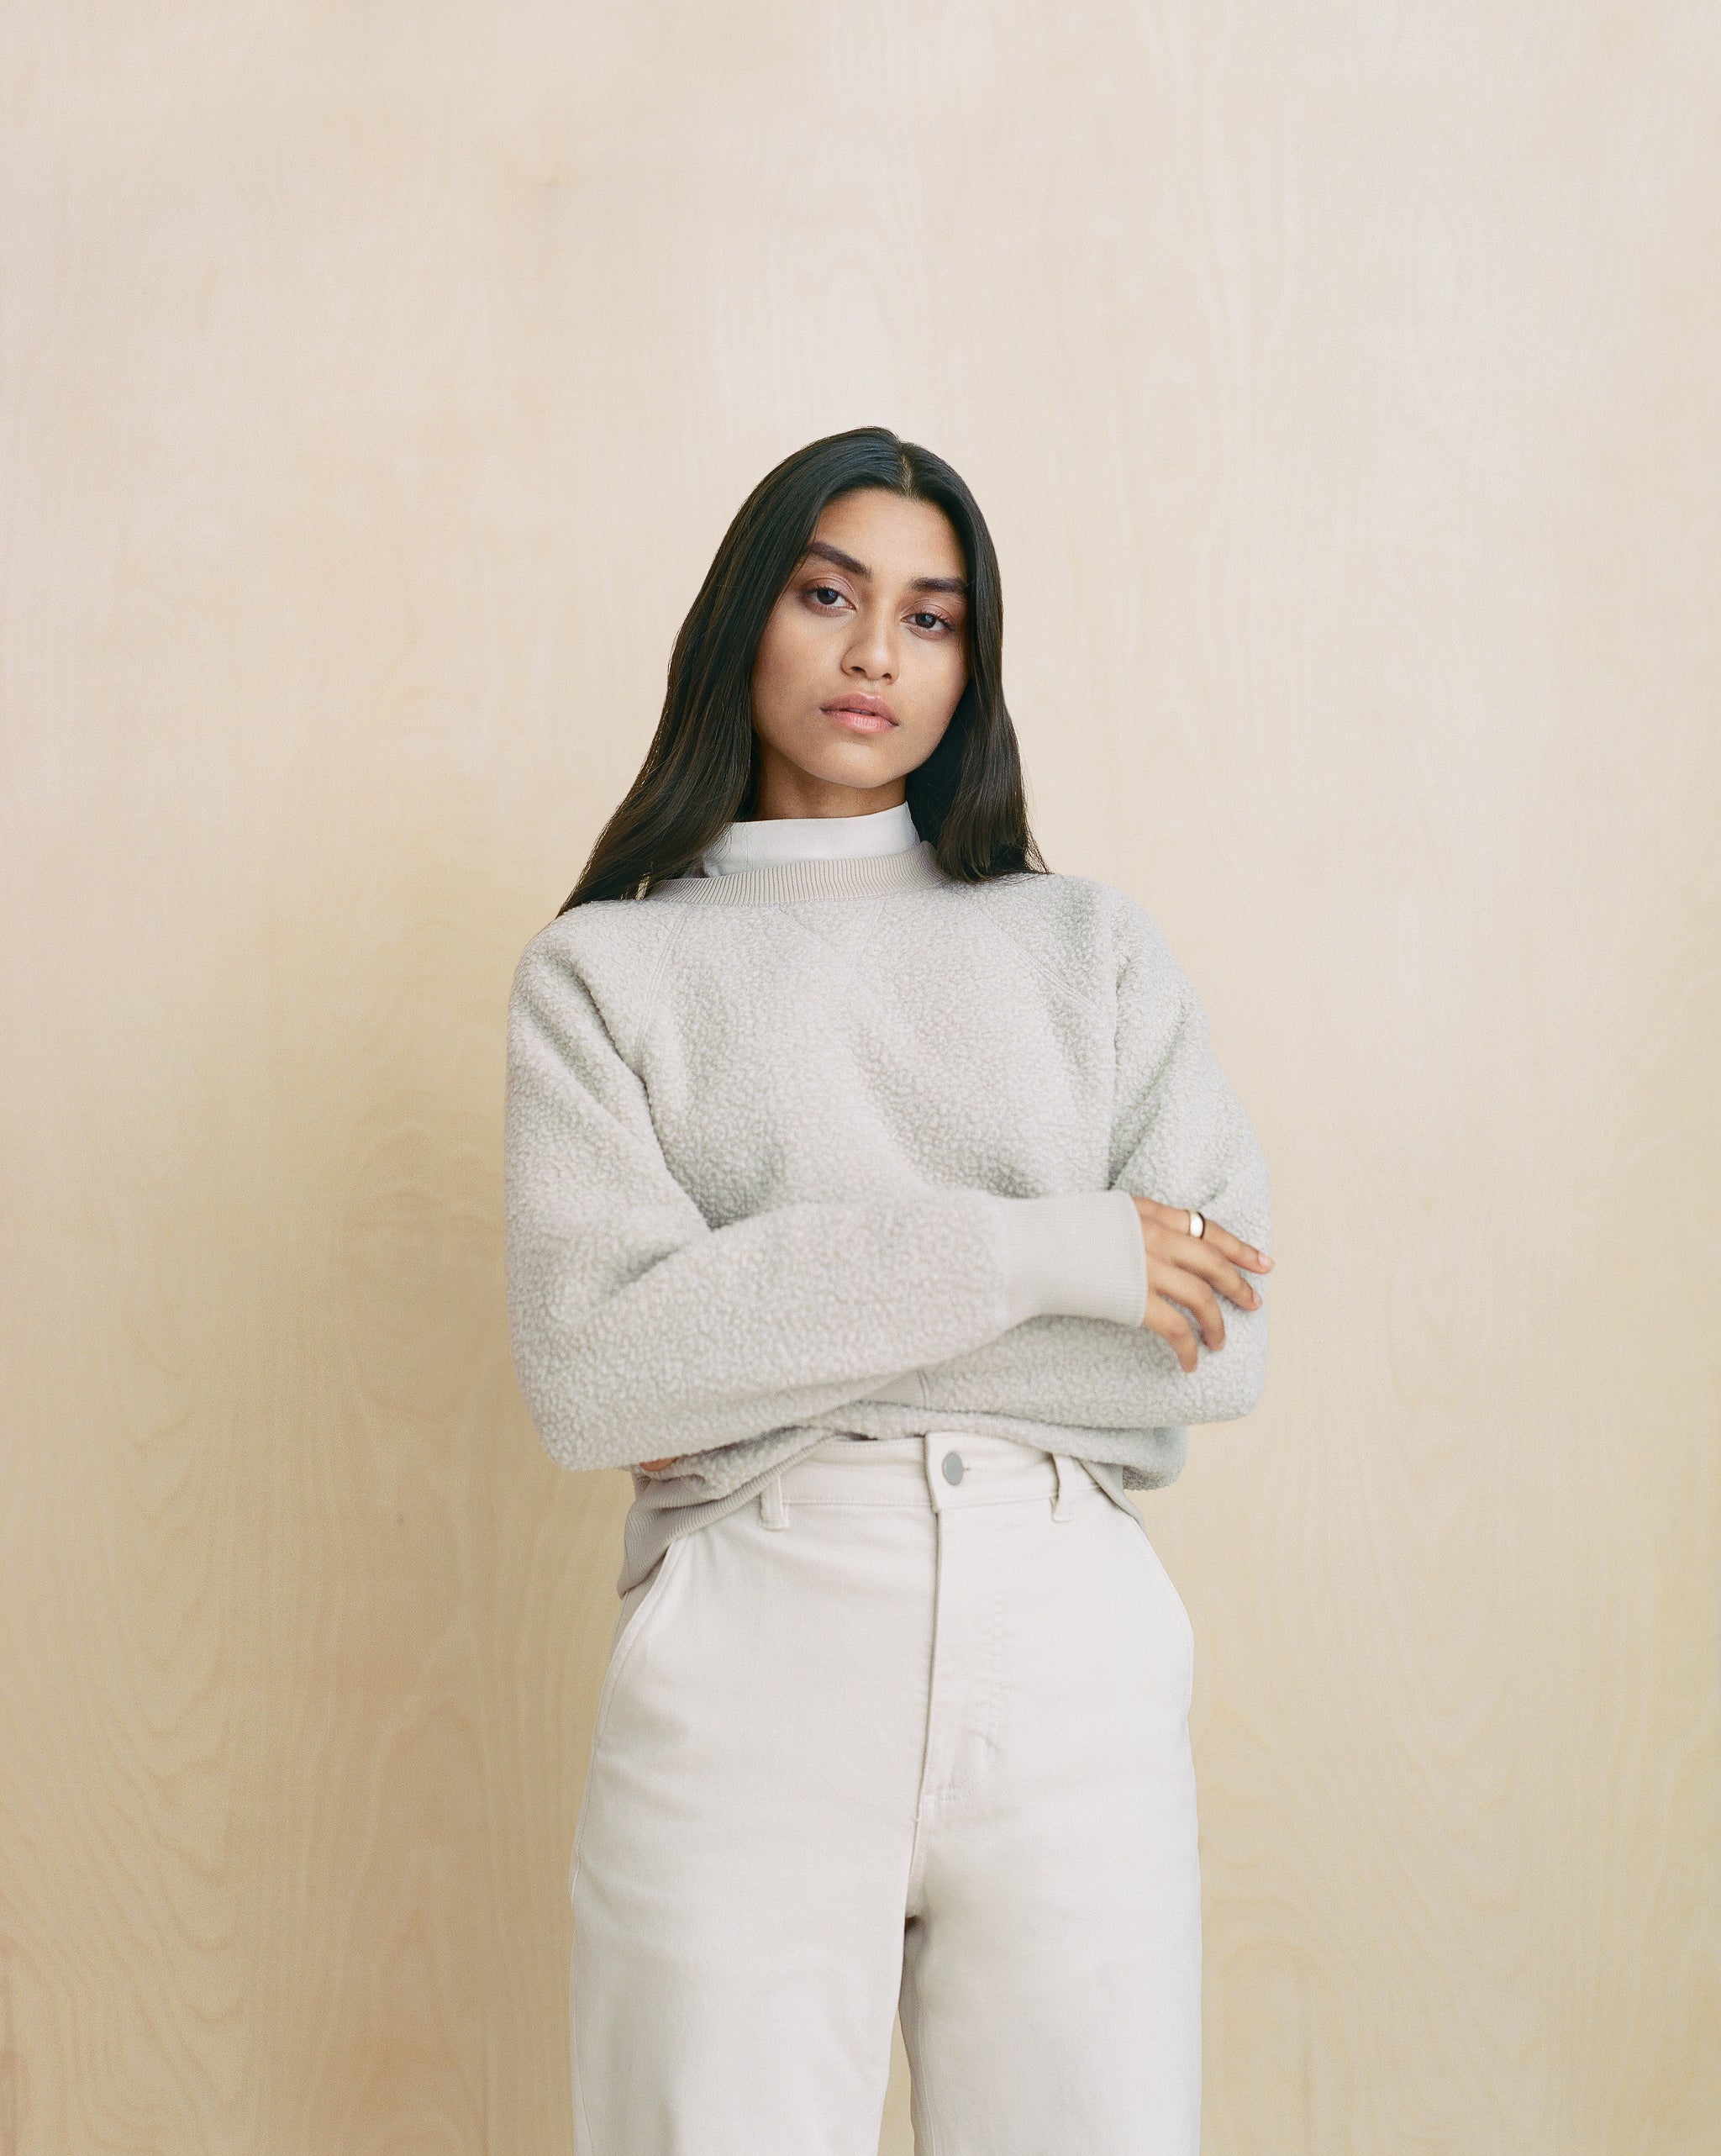 Everlane Partners With Nordstrom For Its Second Pop Up